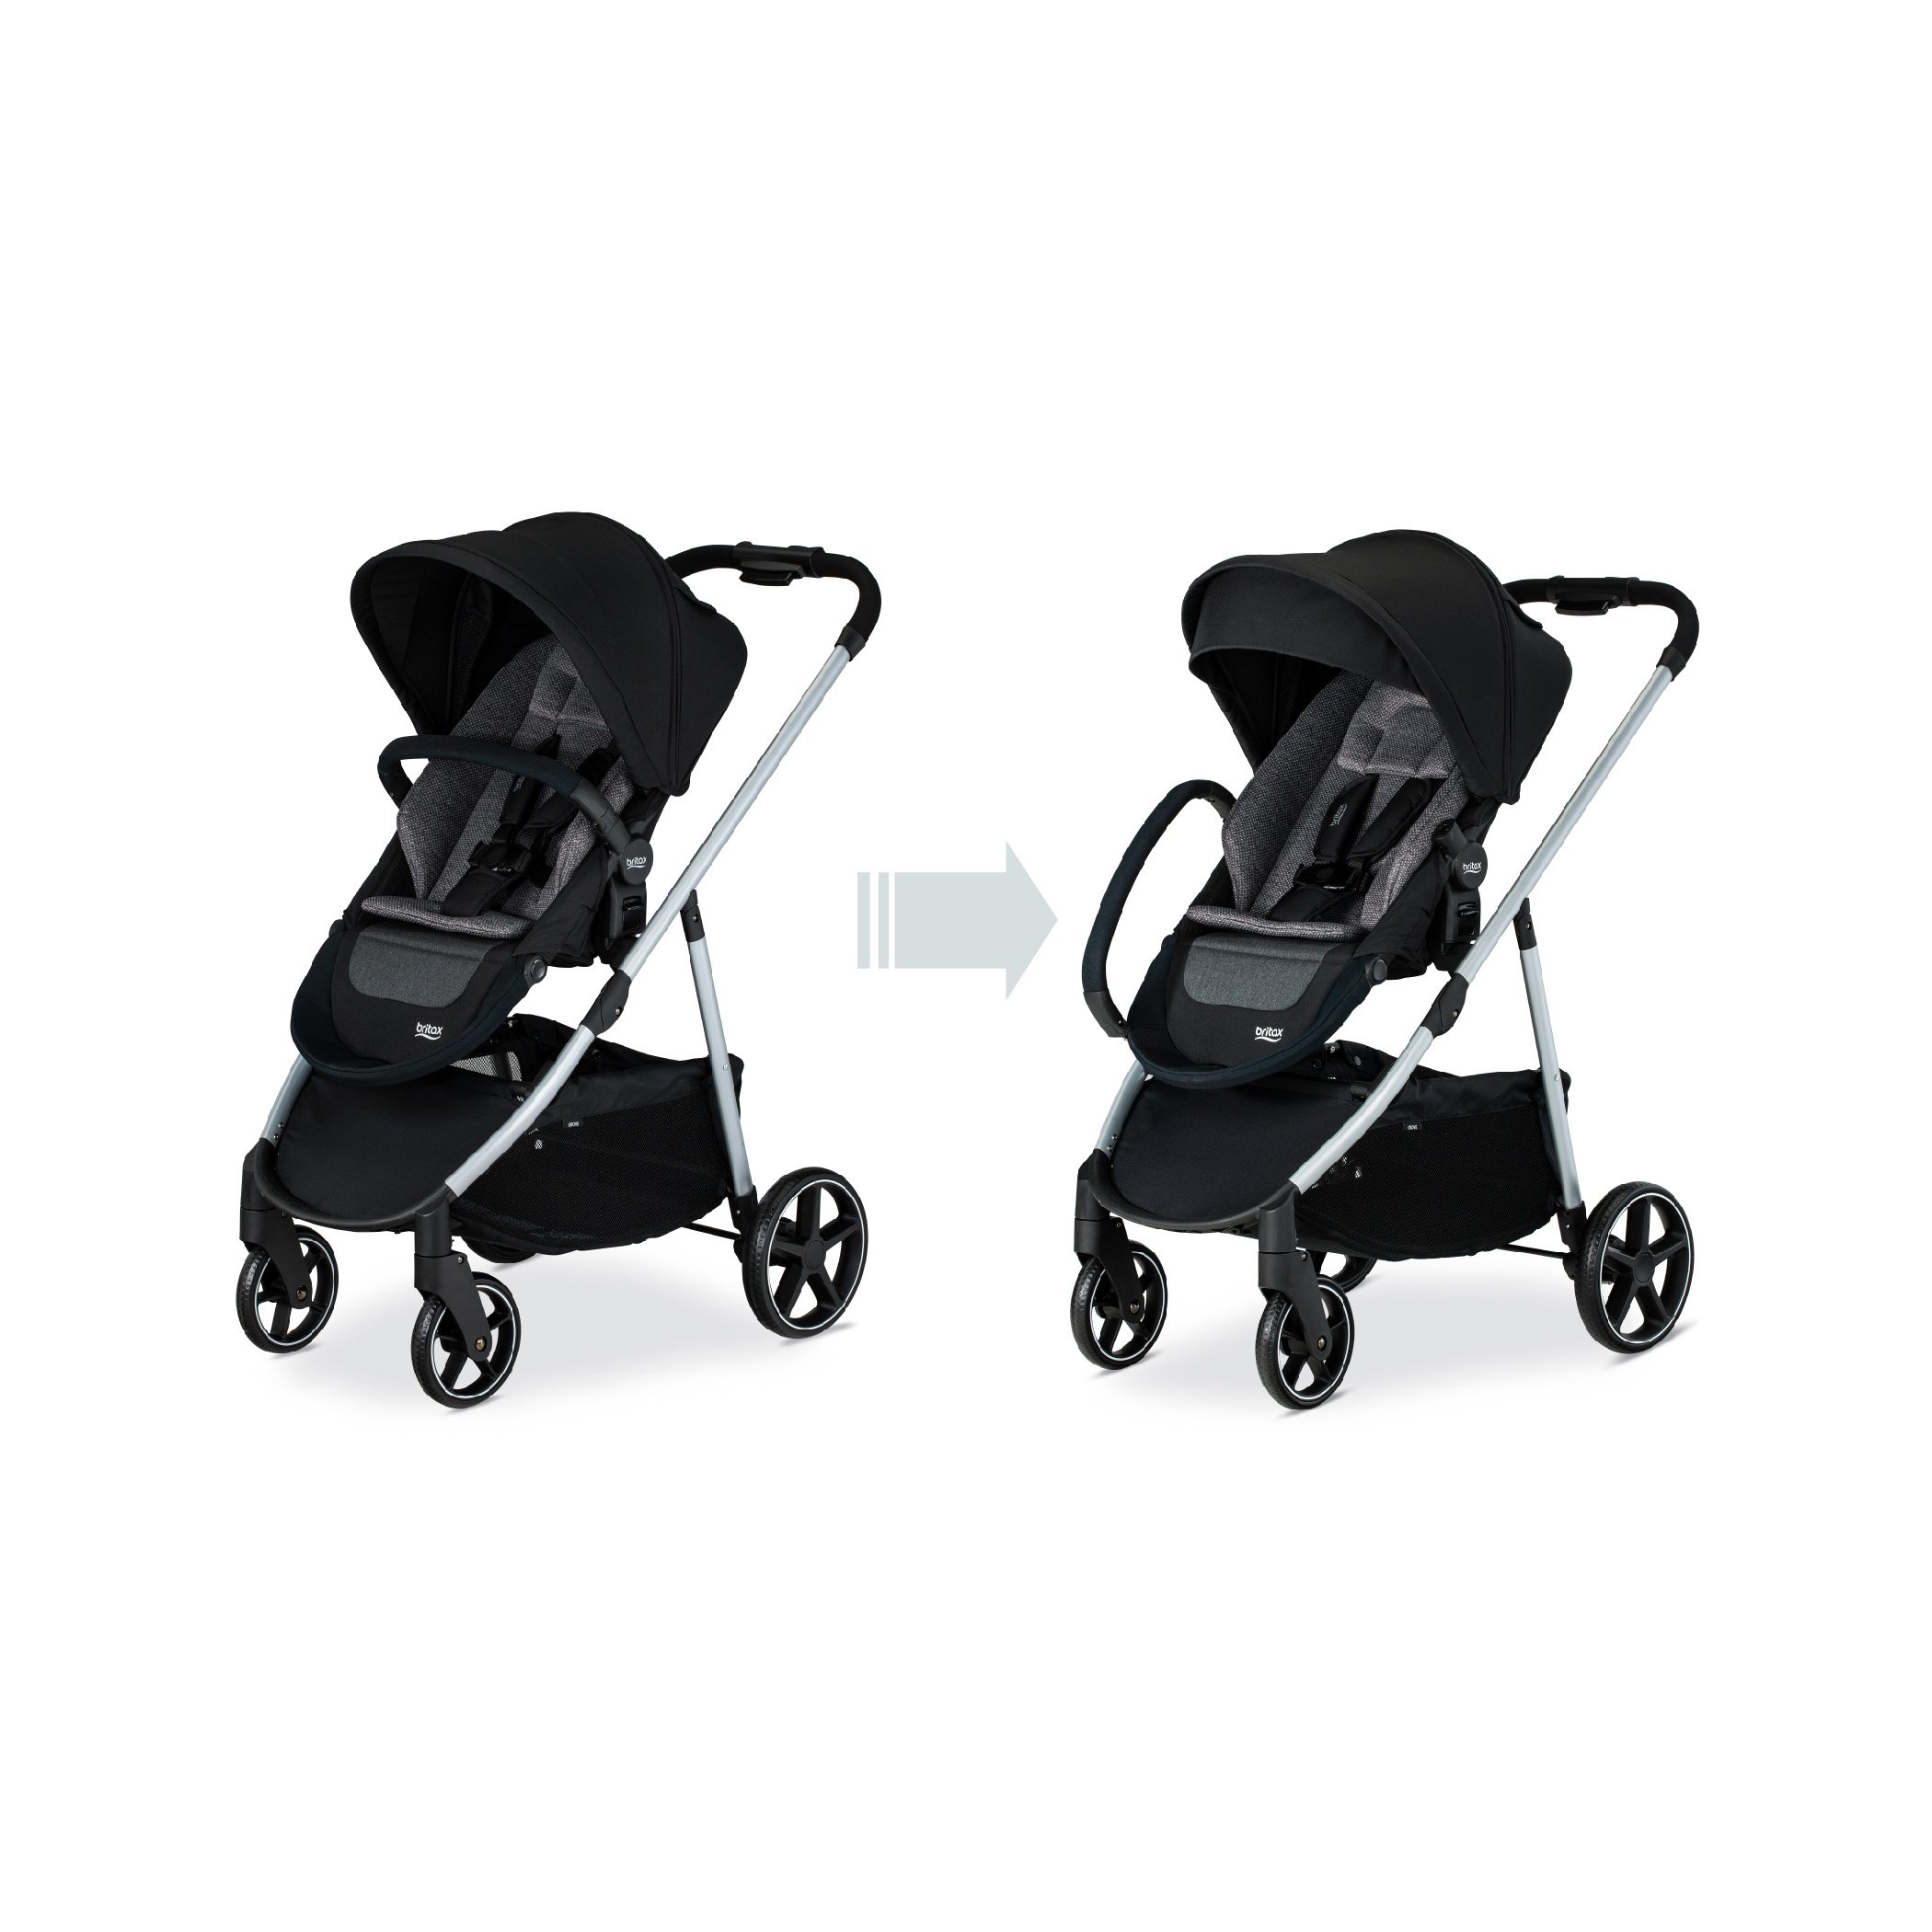 Removal of Bumper Bar from Stroller (Copy)